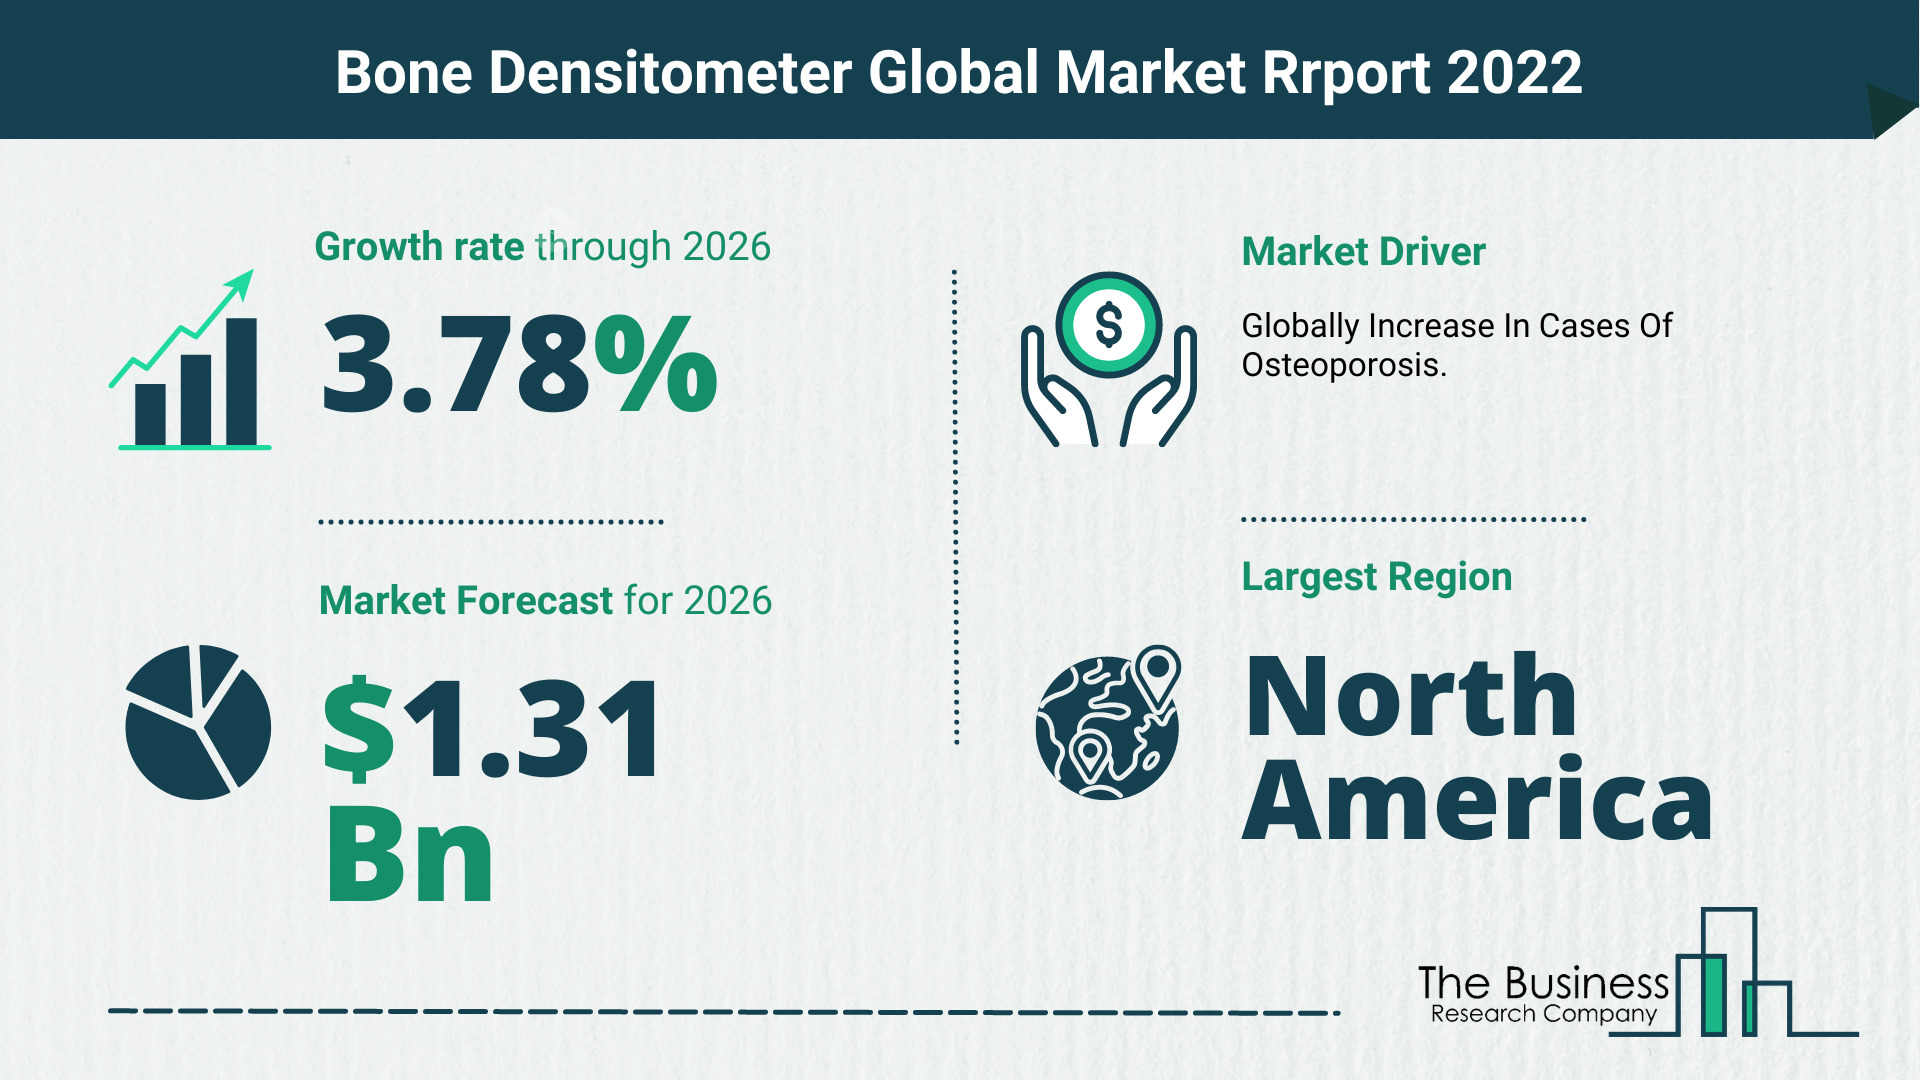 What Is The Bone Densitometer Market Overview In 2022?